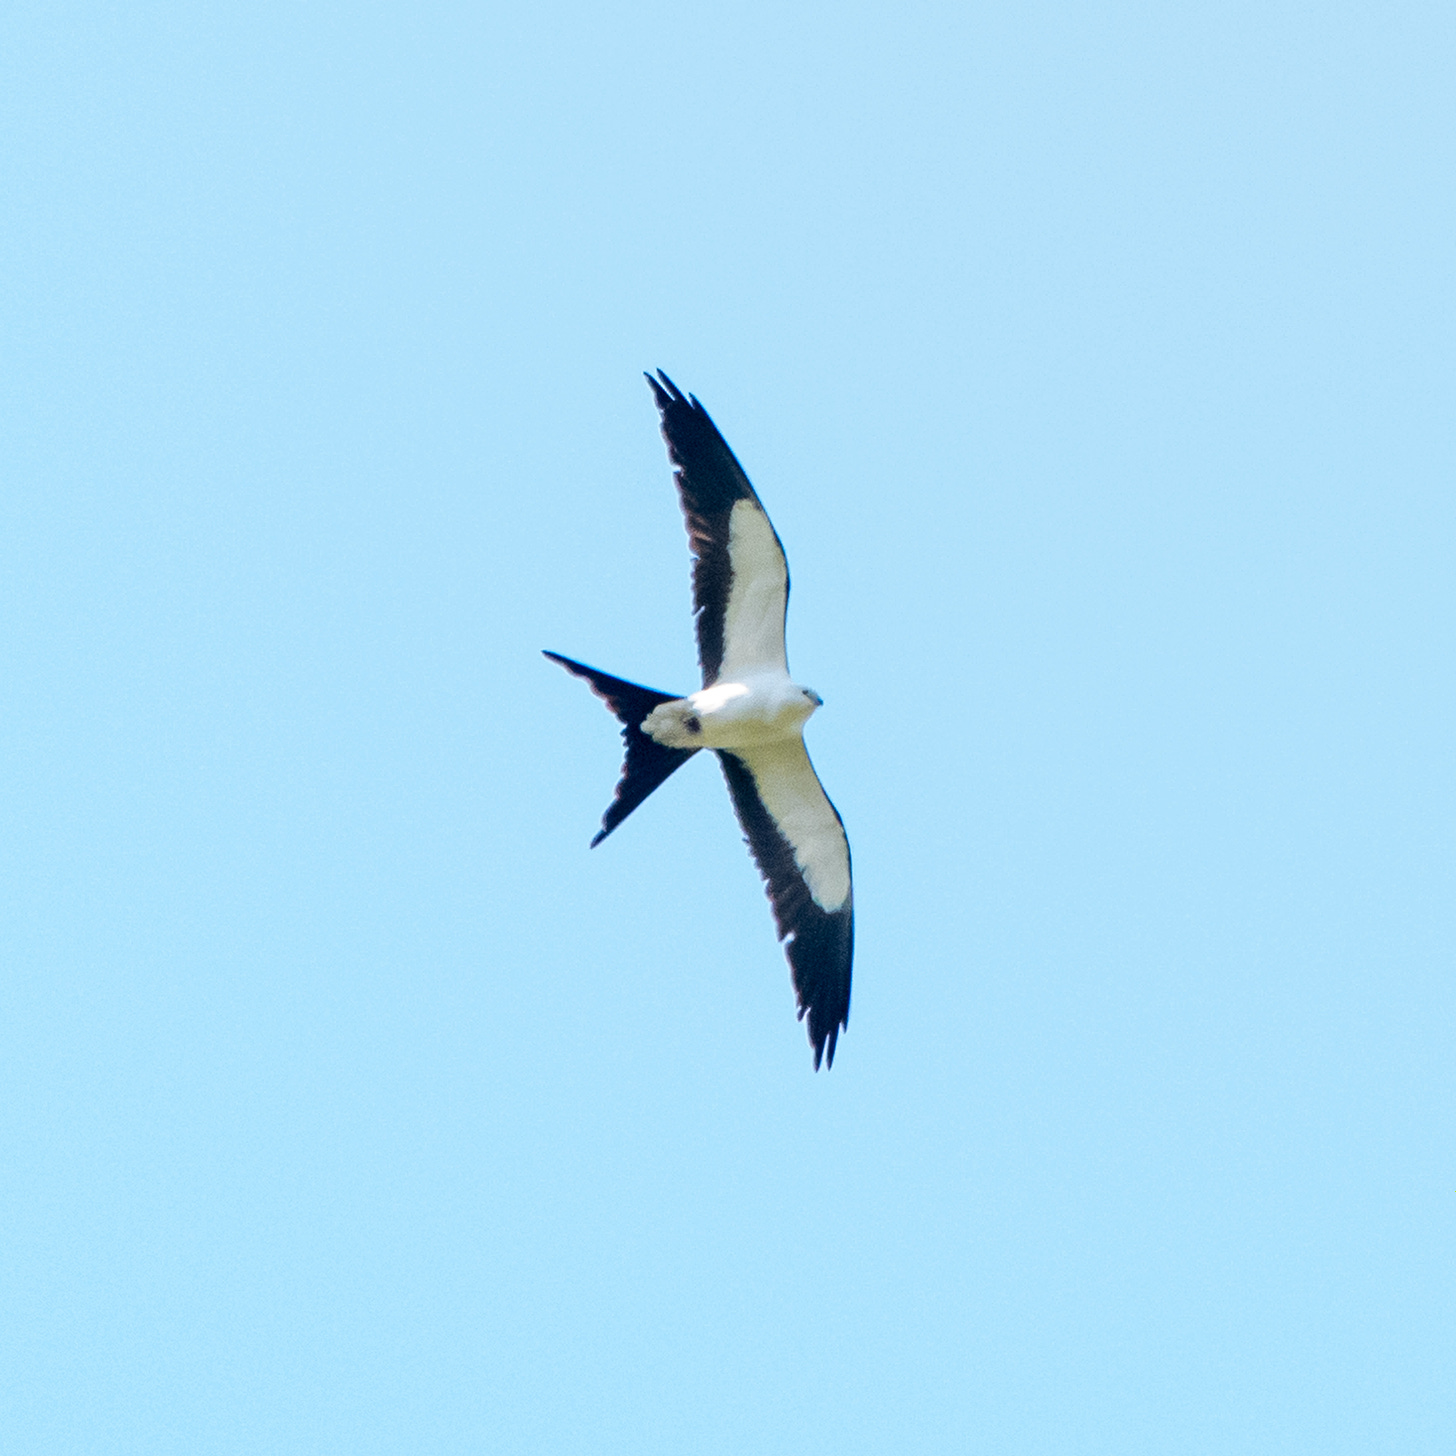 A swallow-tailed kite, with a baby-seal face and a stylish old-school-tuxedo forked tail, seen from below in a blue sky